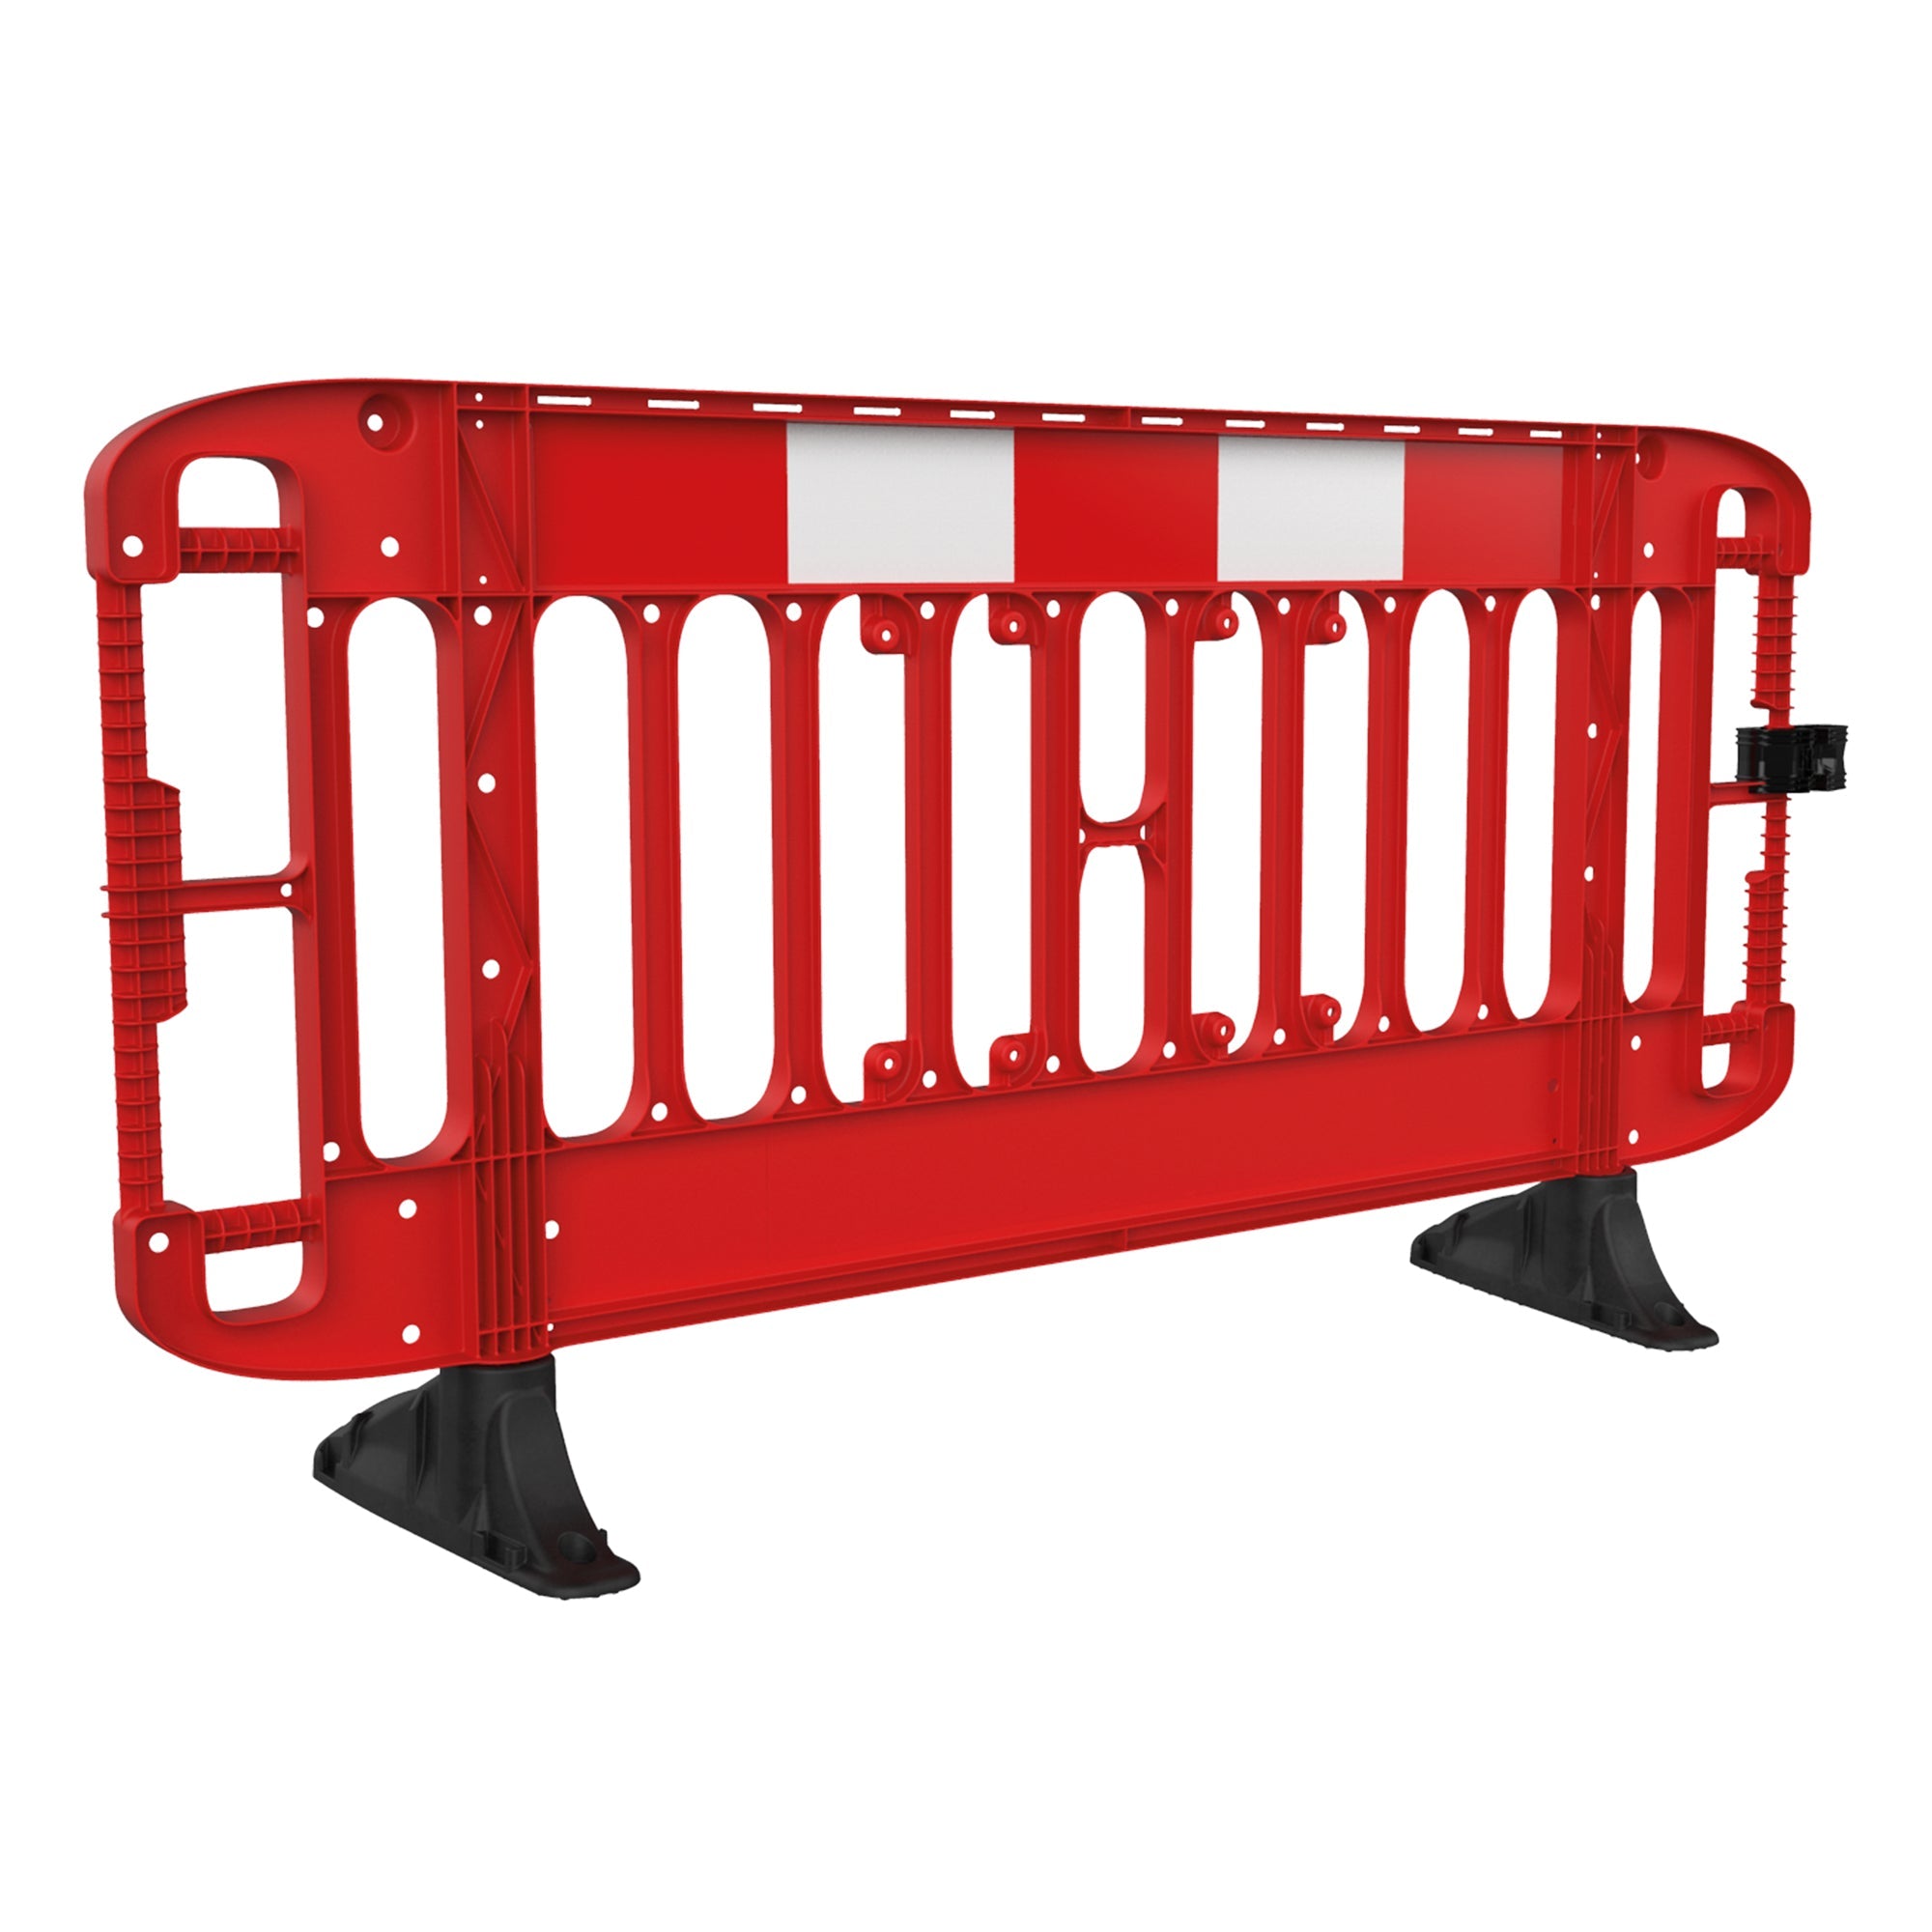 JSP Titan® 2m Injection Moulded Road Traffic Barrier with Black Anti